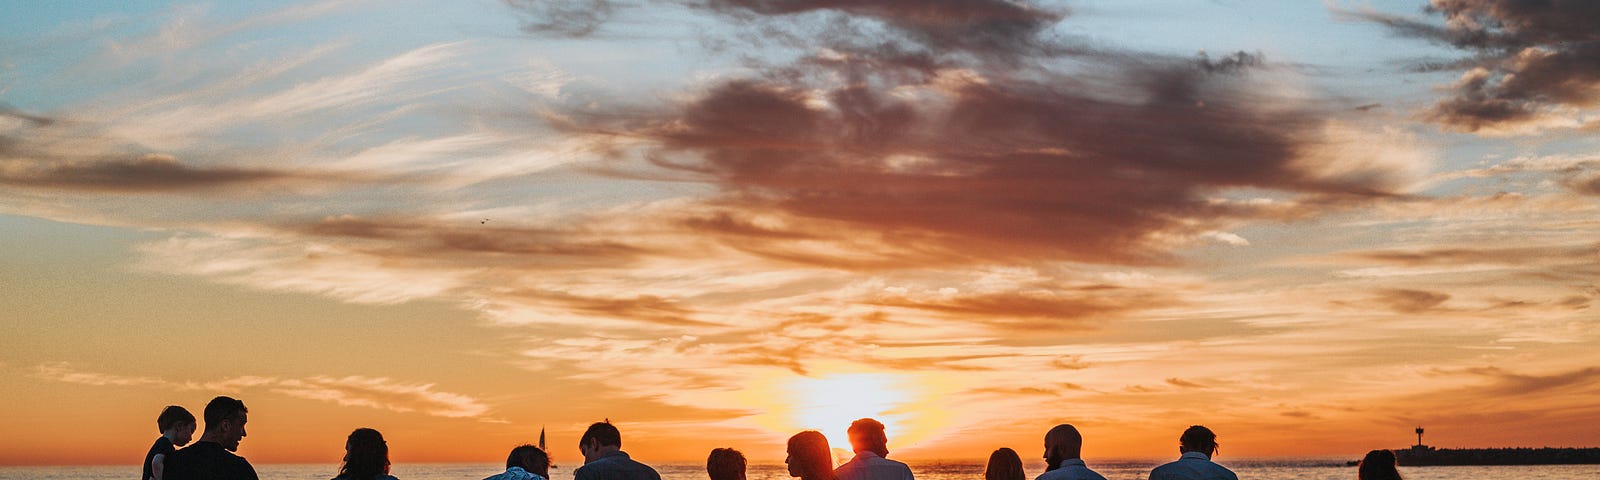 Image shows a large group of people, suggestive of a family, all holding hands or hugging, standing on the beach at sunset.